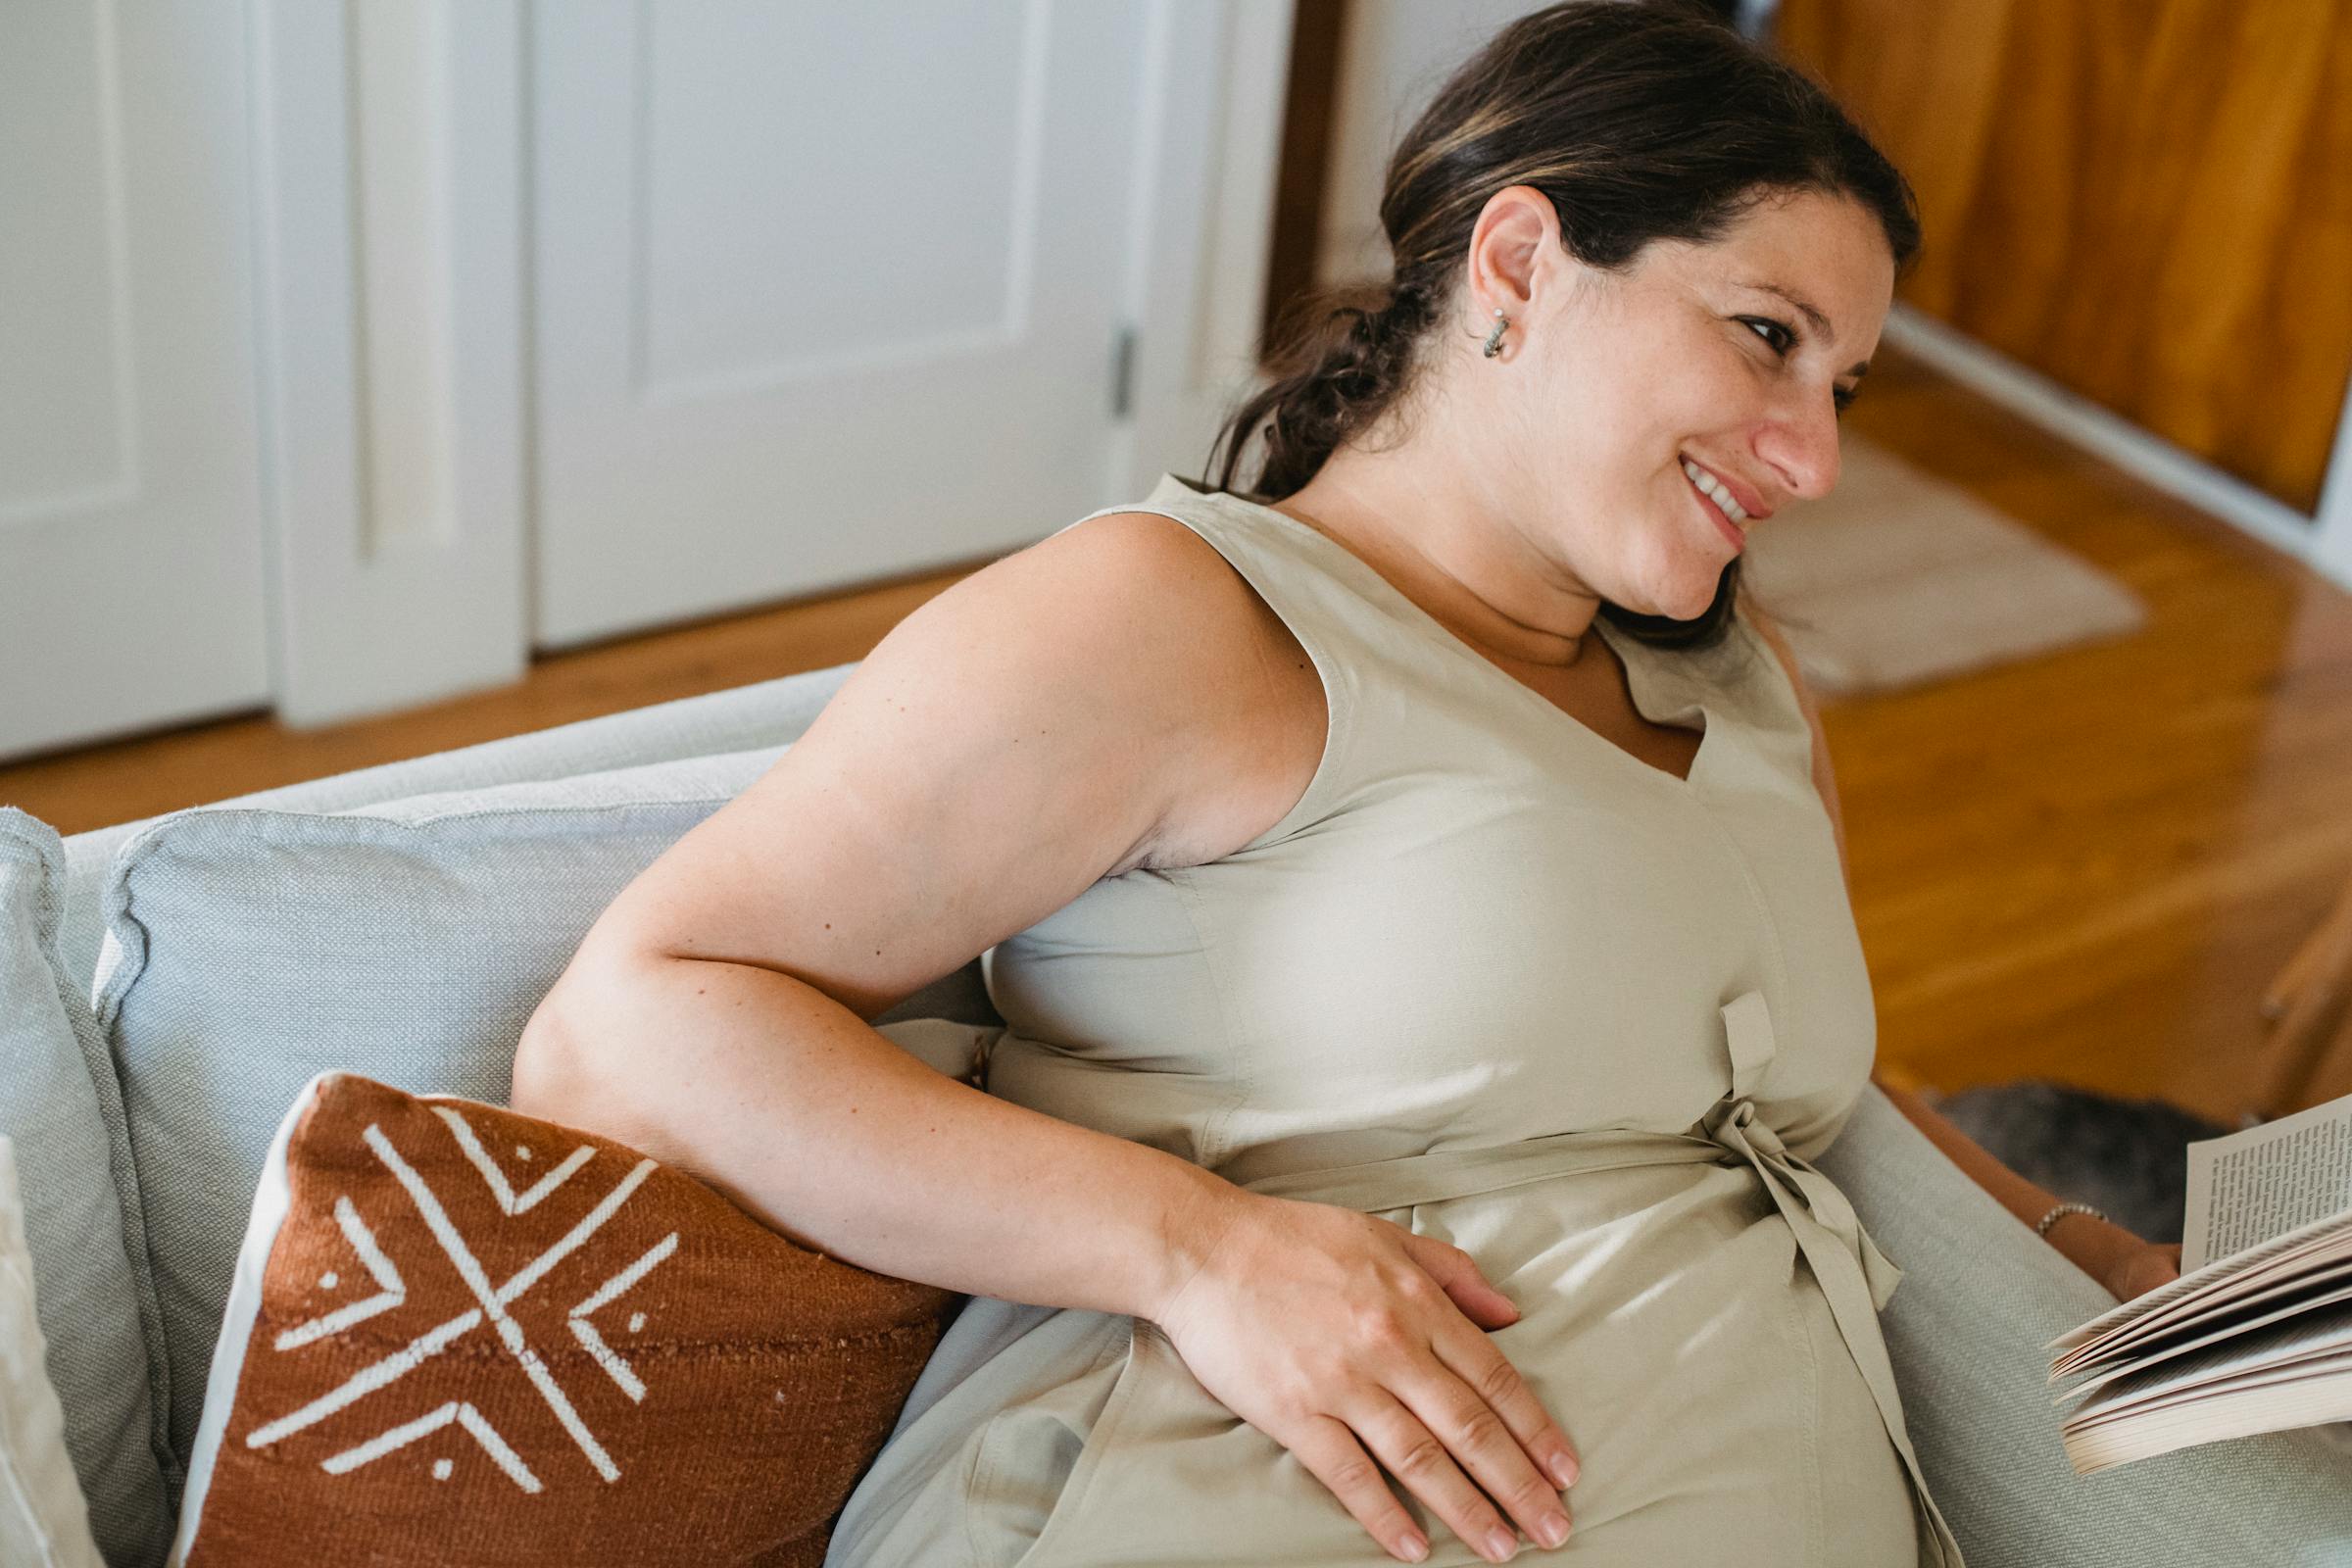 A pregnant woman smiling and sitting on a couch | Source: Pexels